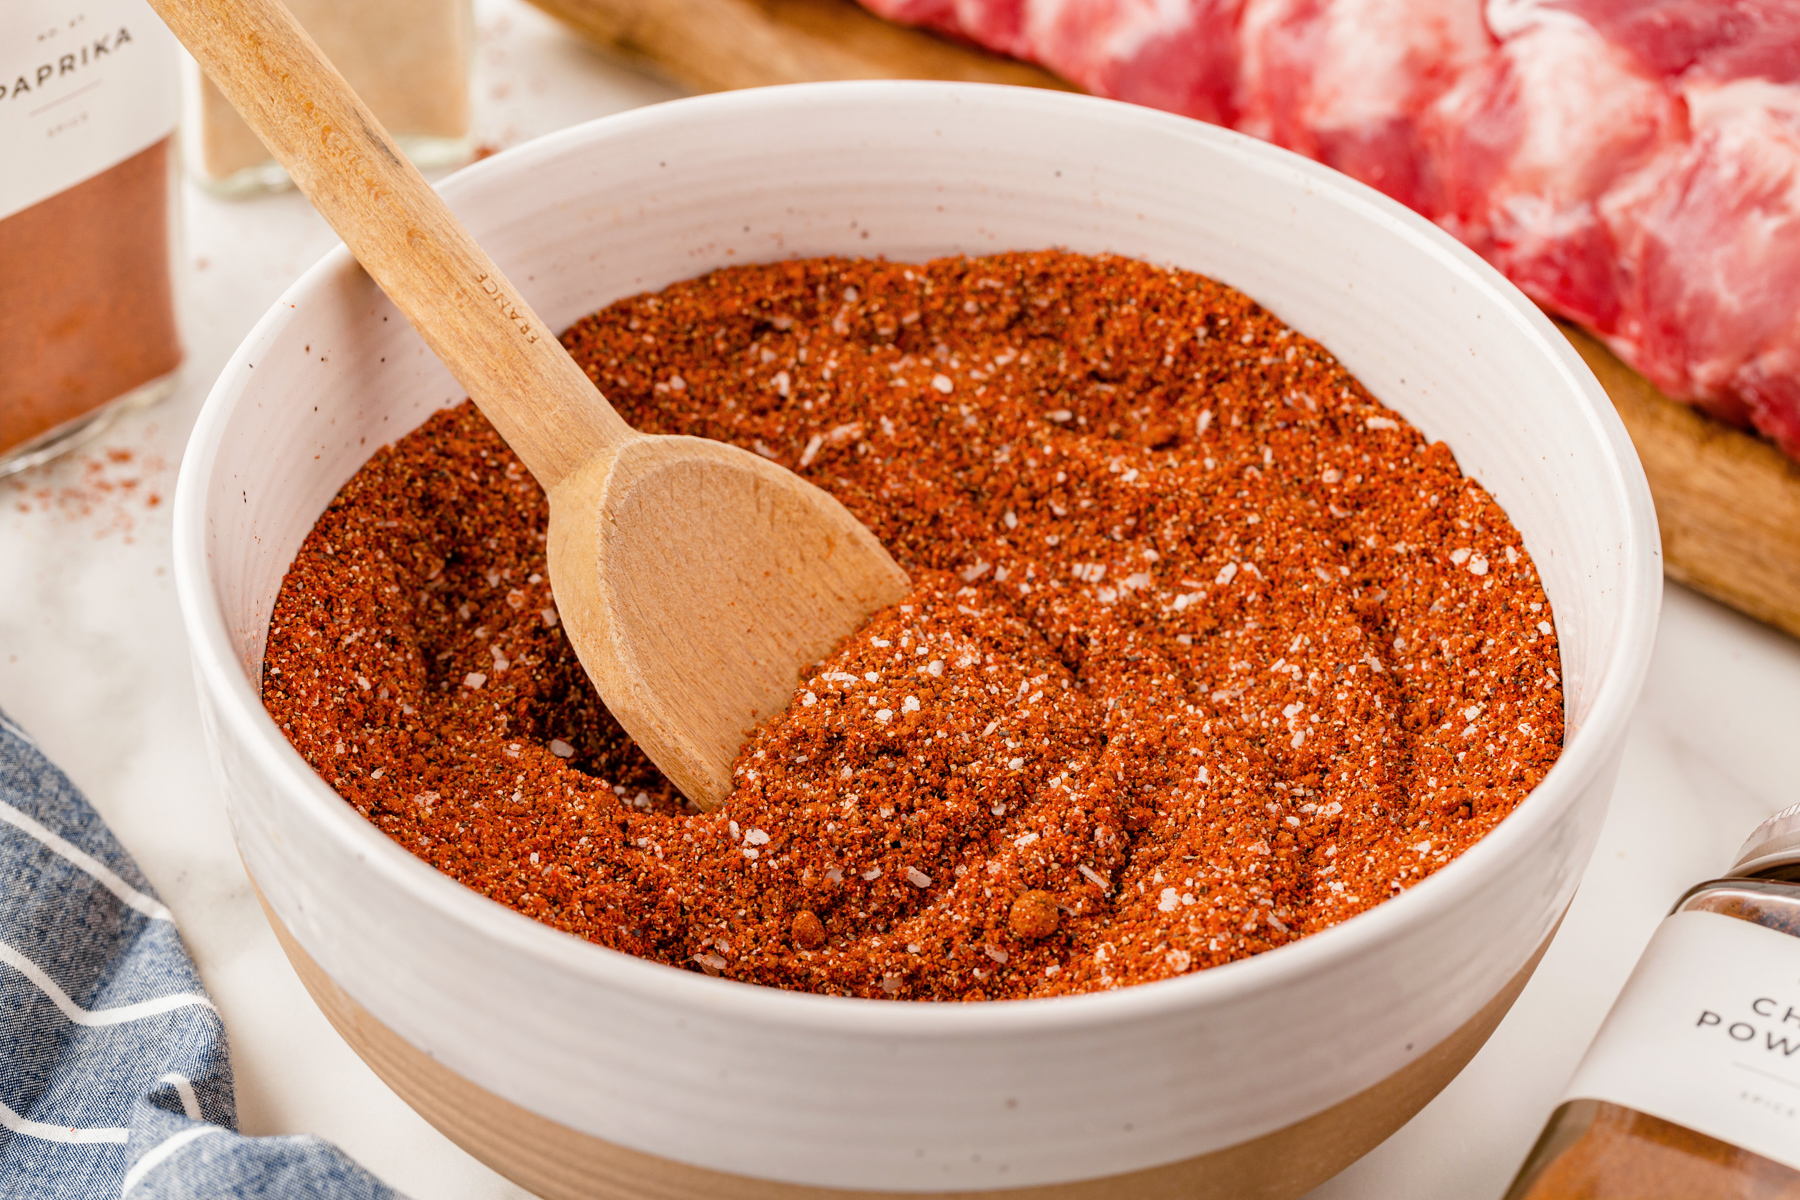 BBQ rub ingredients mixed together in a white bowl.